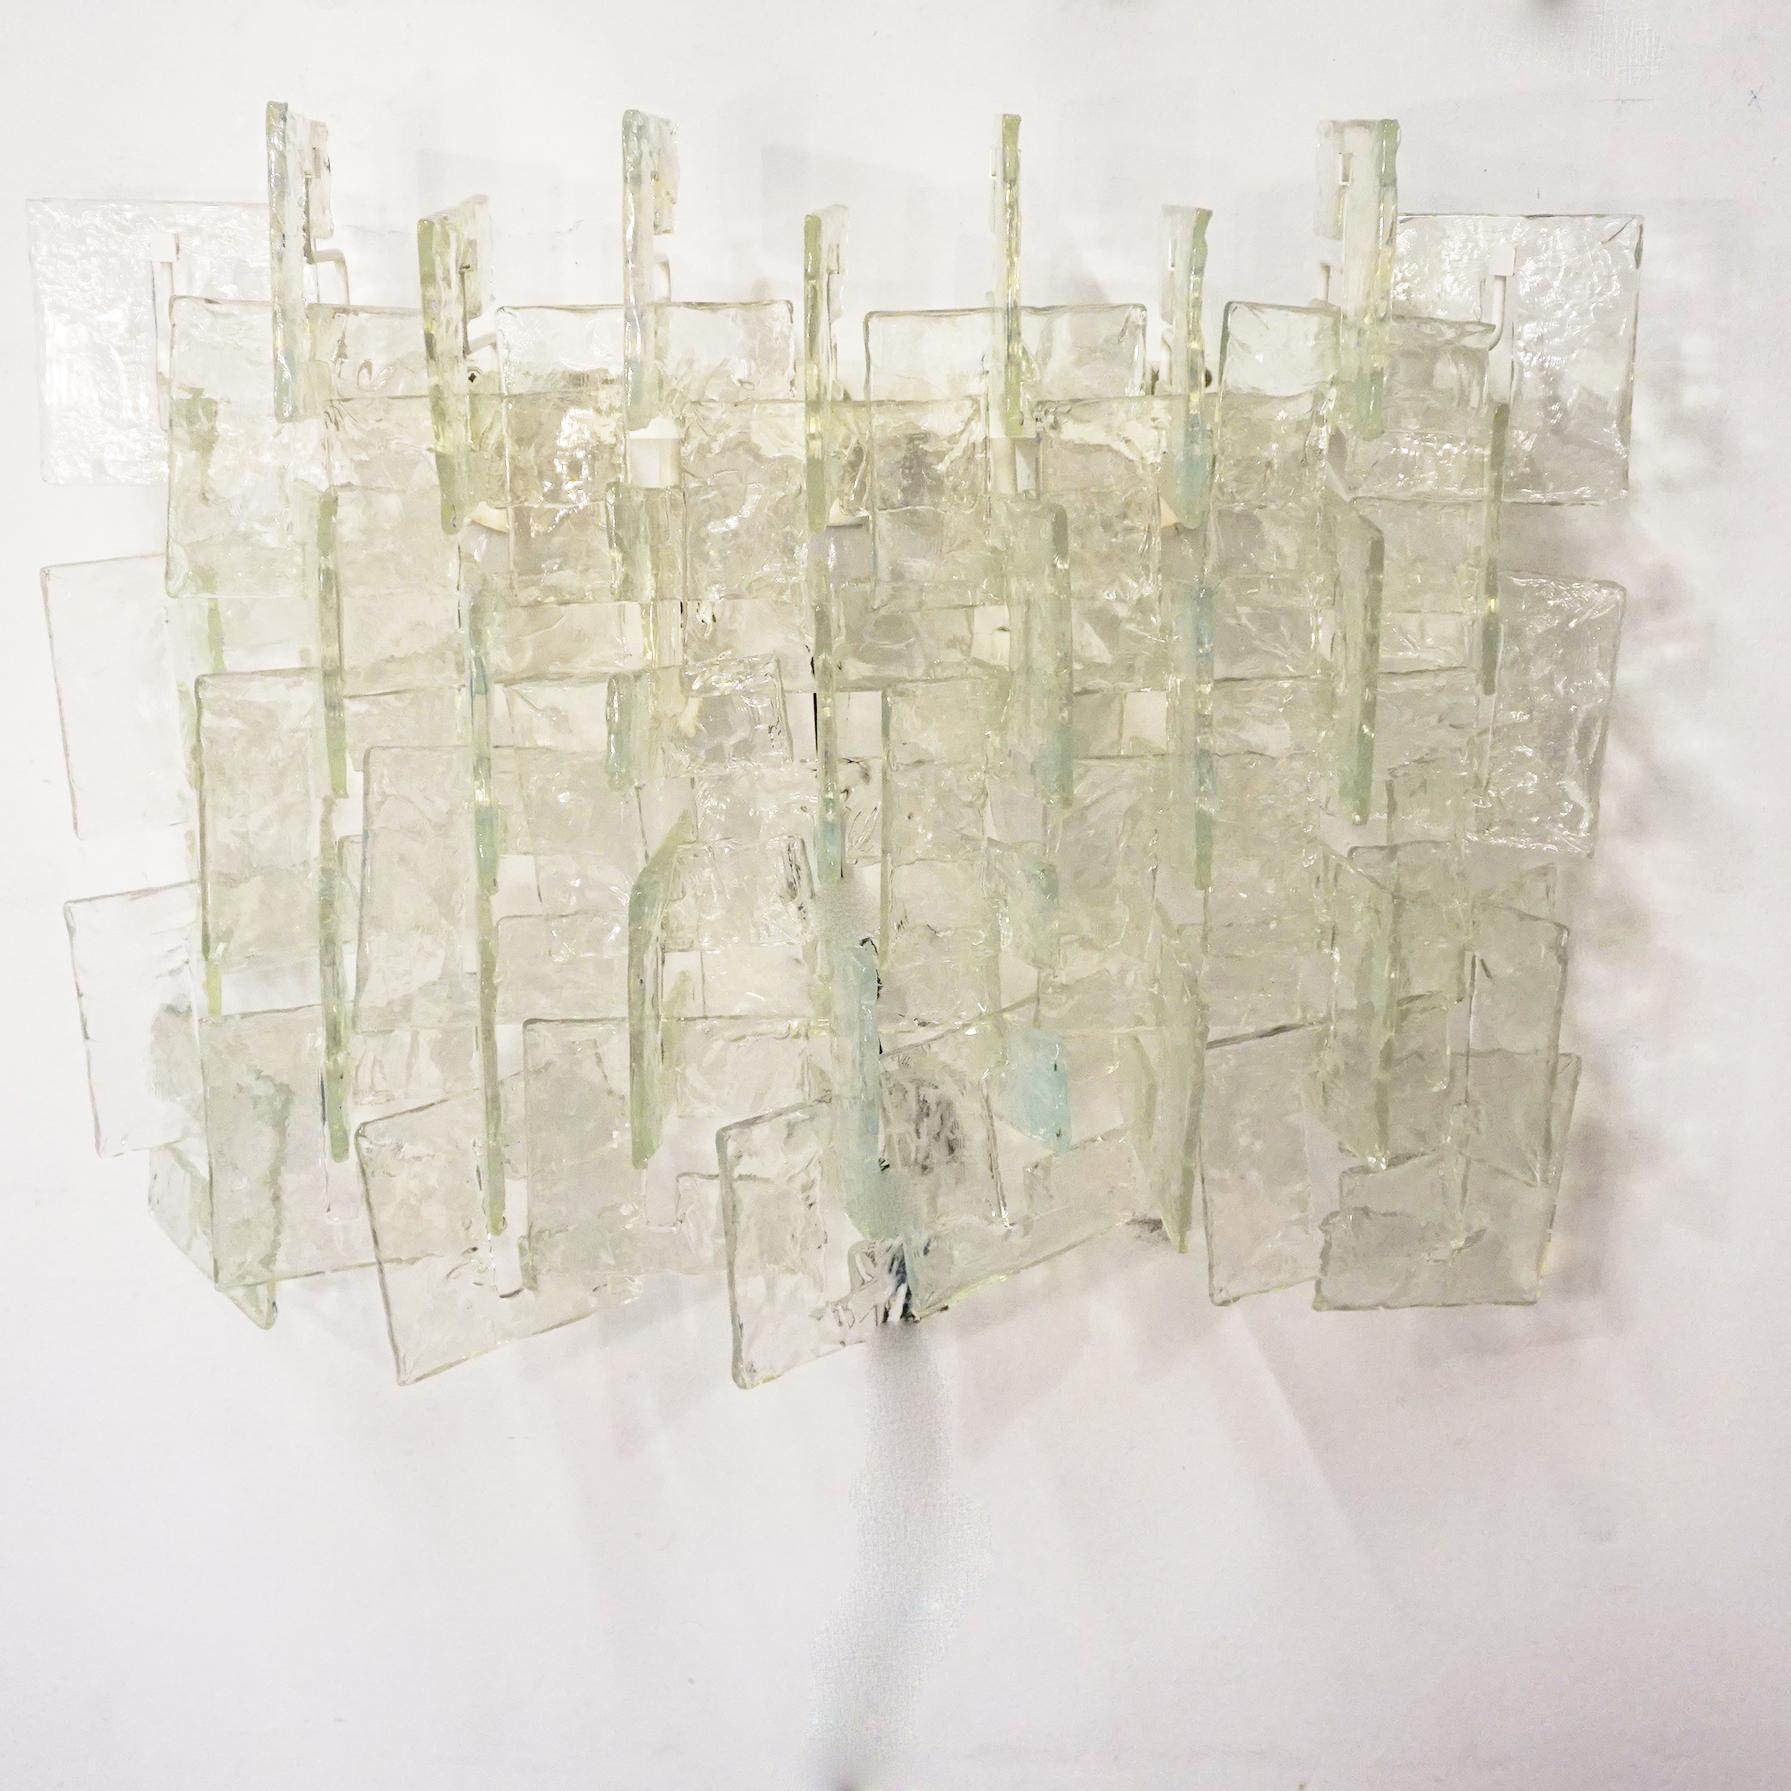 Fantastic large and rare vintage wall light by Carlo Nason for Mazzega, produced in Murano Italy in the 1970s. The Interlocking Murano glass pieces can be linked together. They are made of excellent textured handblown murano glasses and are mounted